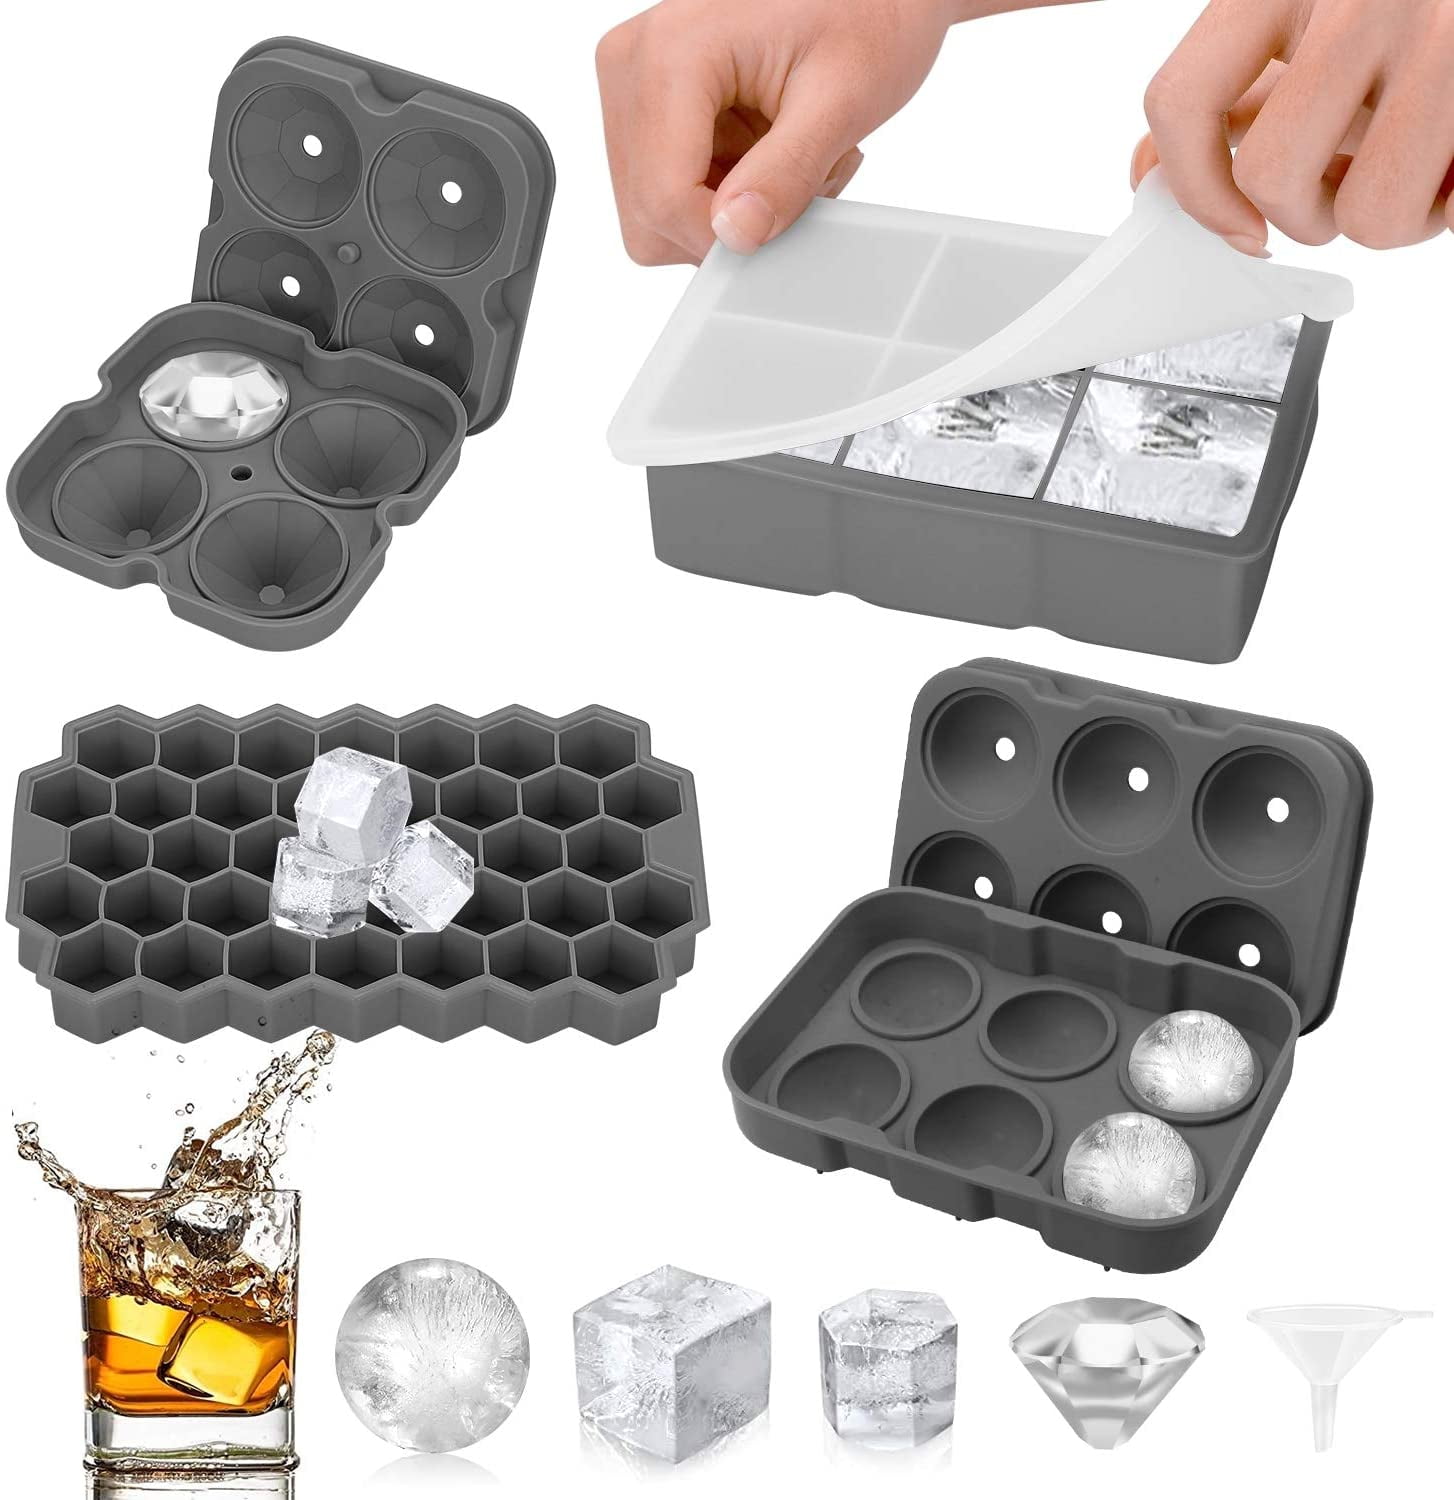 NACOLUS Disposable Ice Cube Trays for Freezer Ball Ice Cube Mold Ice Maker Bags BPA-Free 50 Pcs